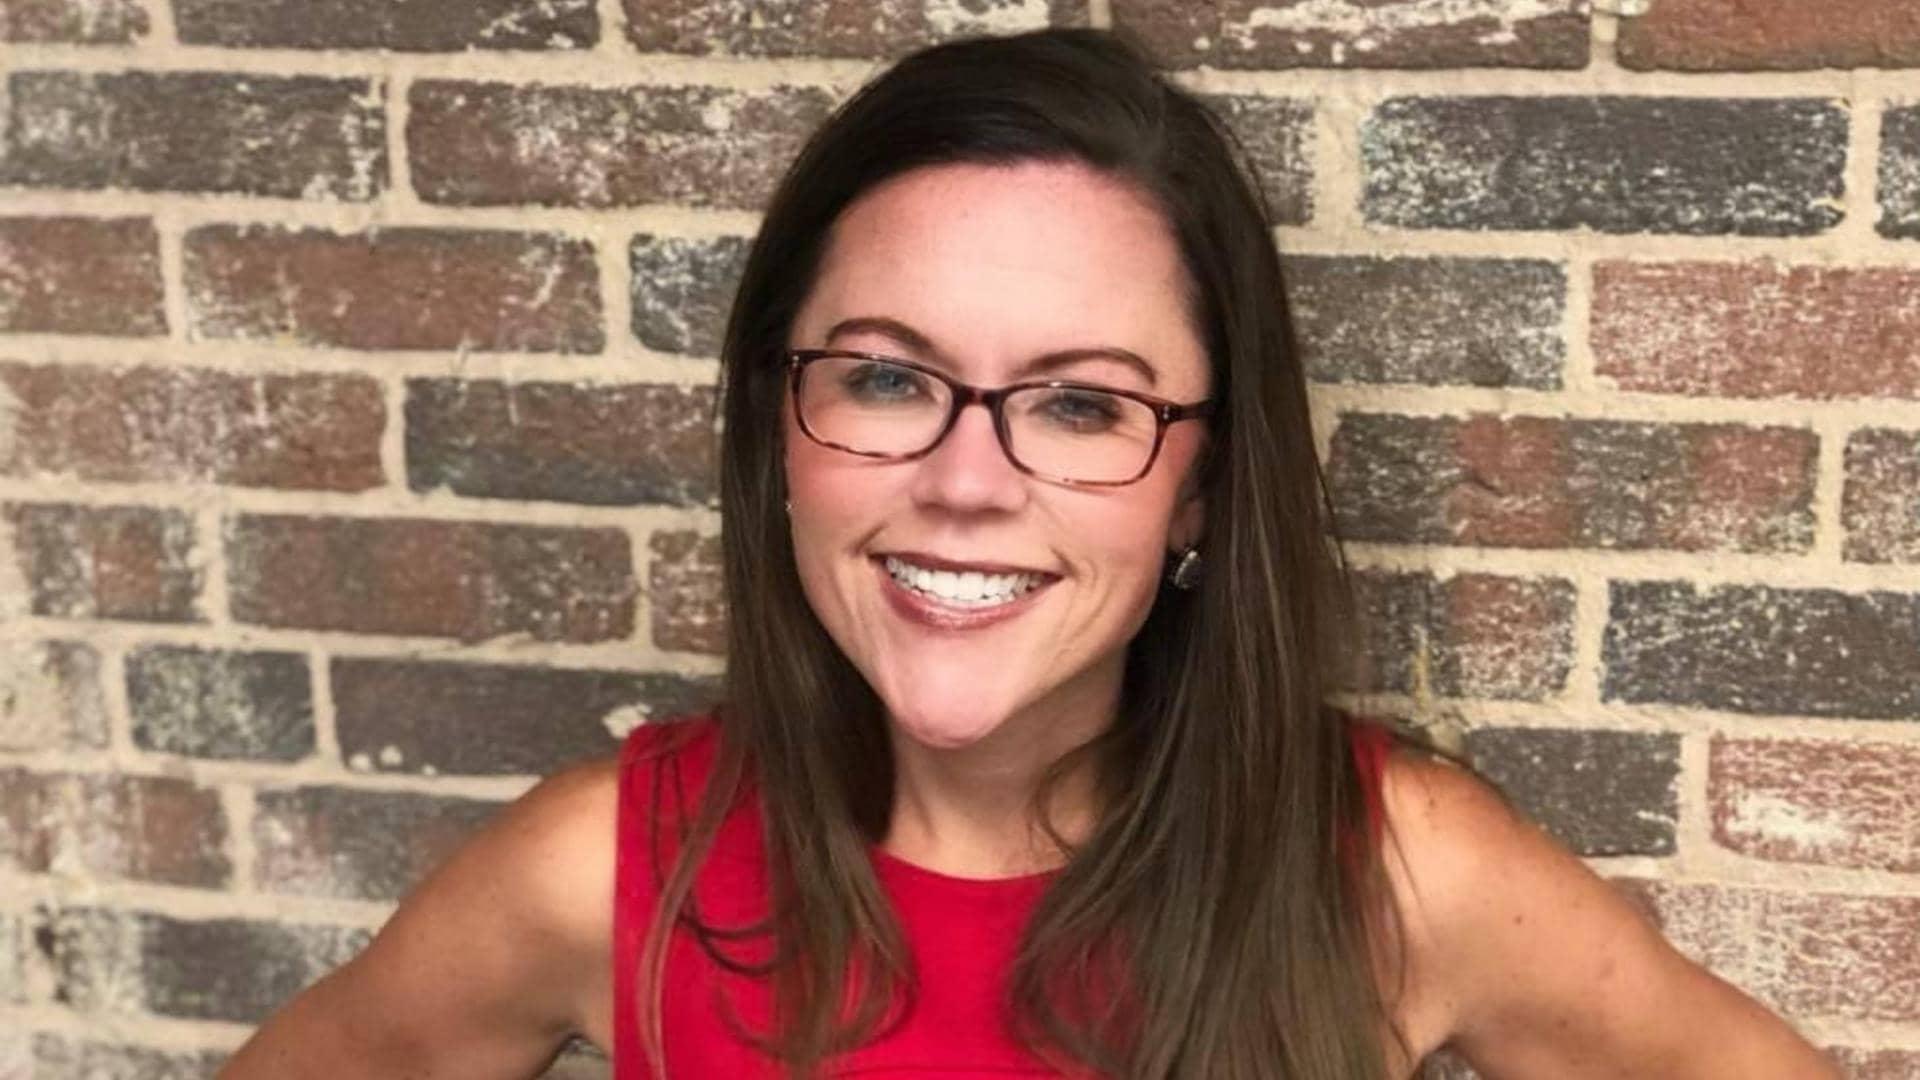 Lauren Sturdivant is the co-founder and president of Case Status, a leading client connection and marketing platform.